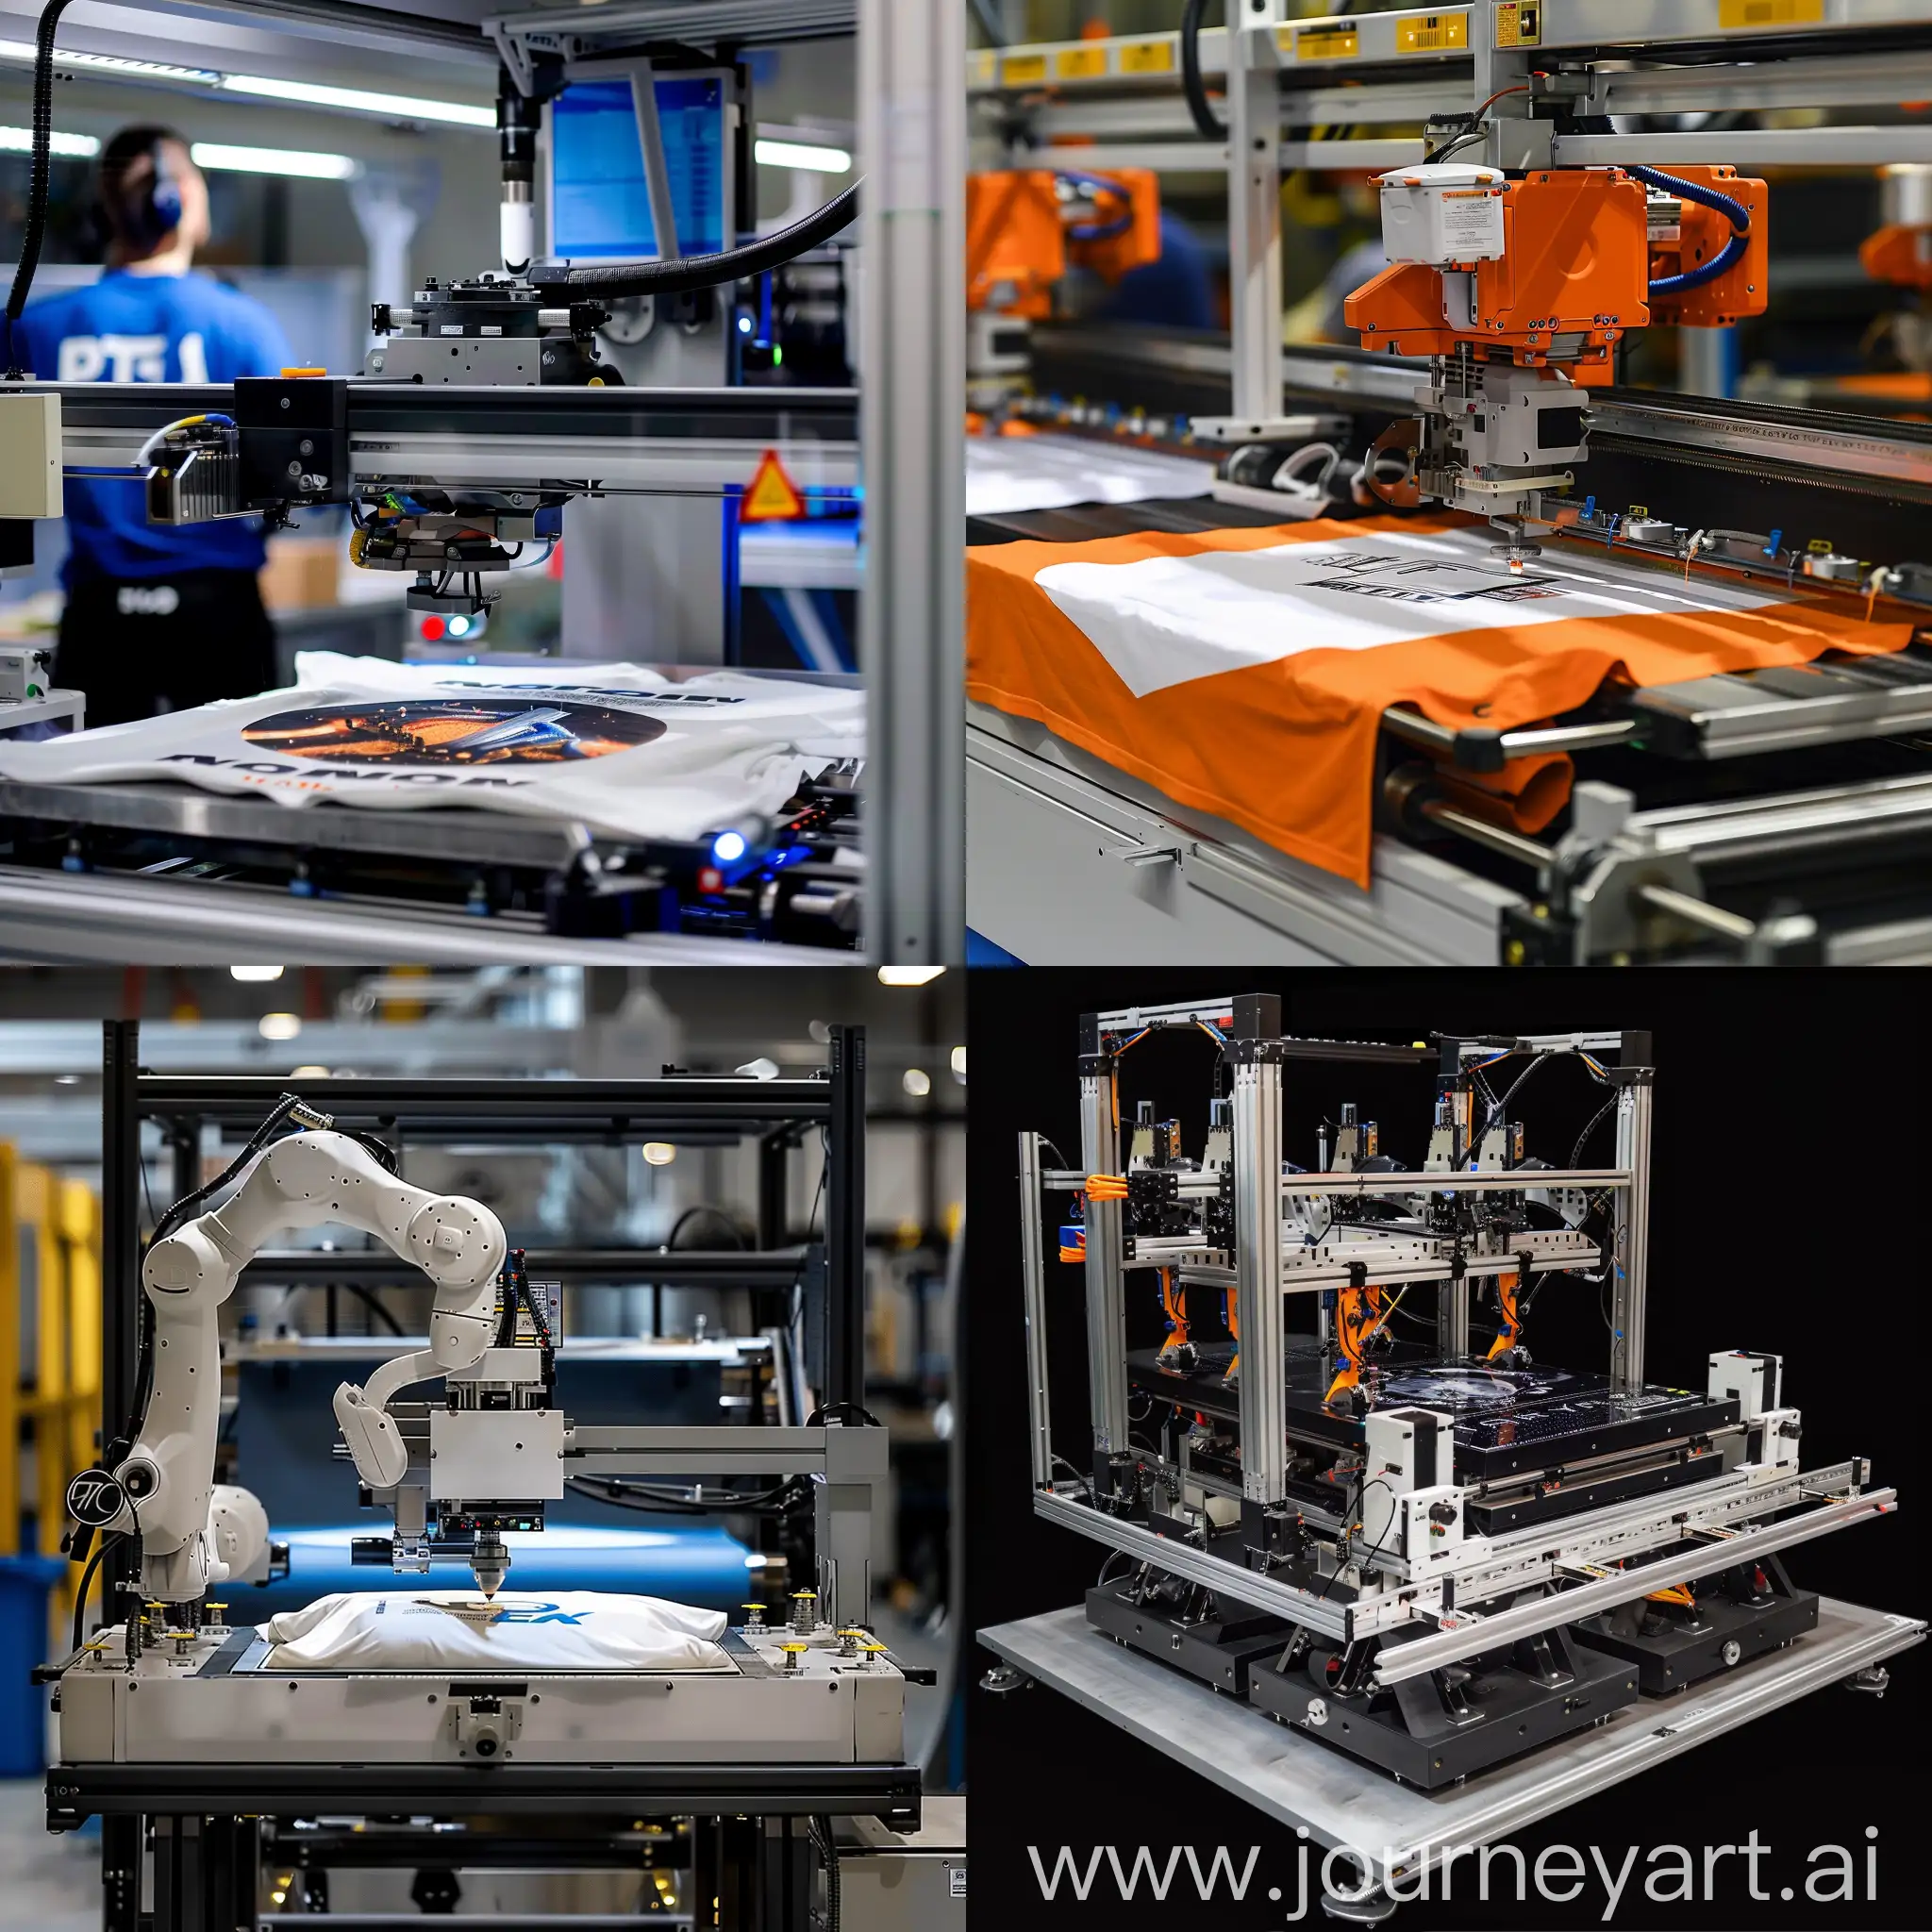 Automated-TShirt-Printing-Machine-Version-6-in-Action